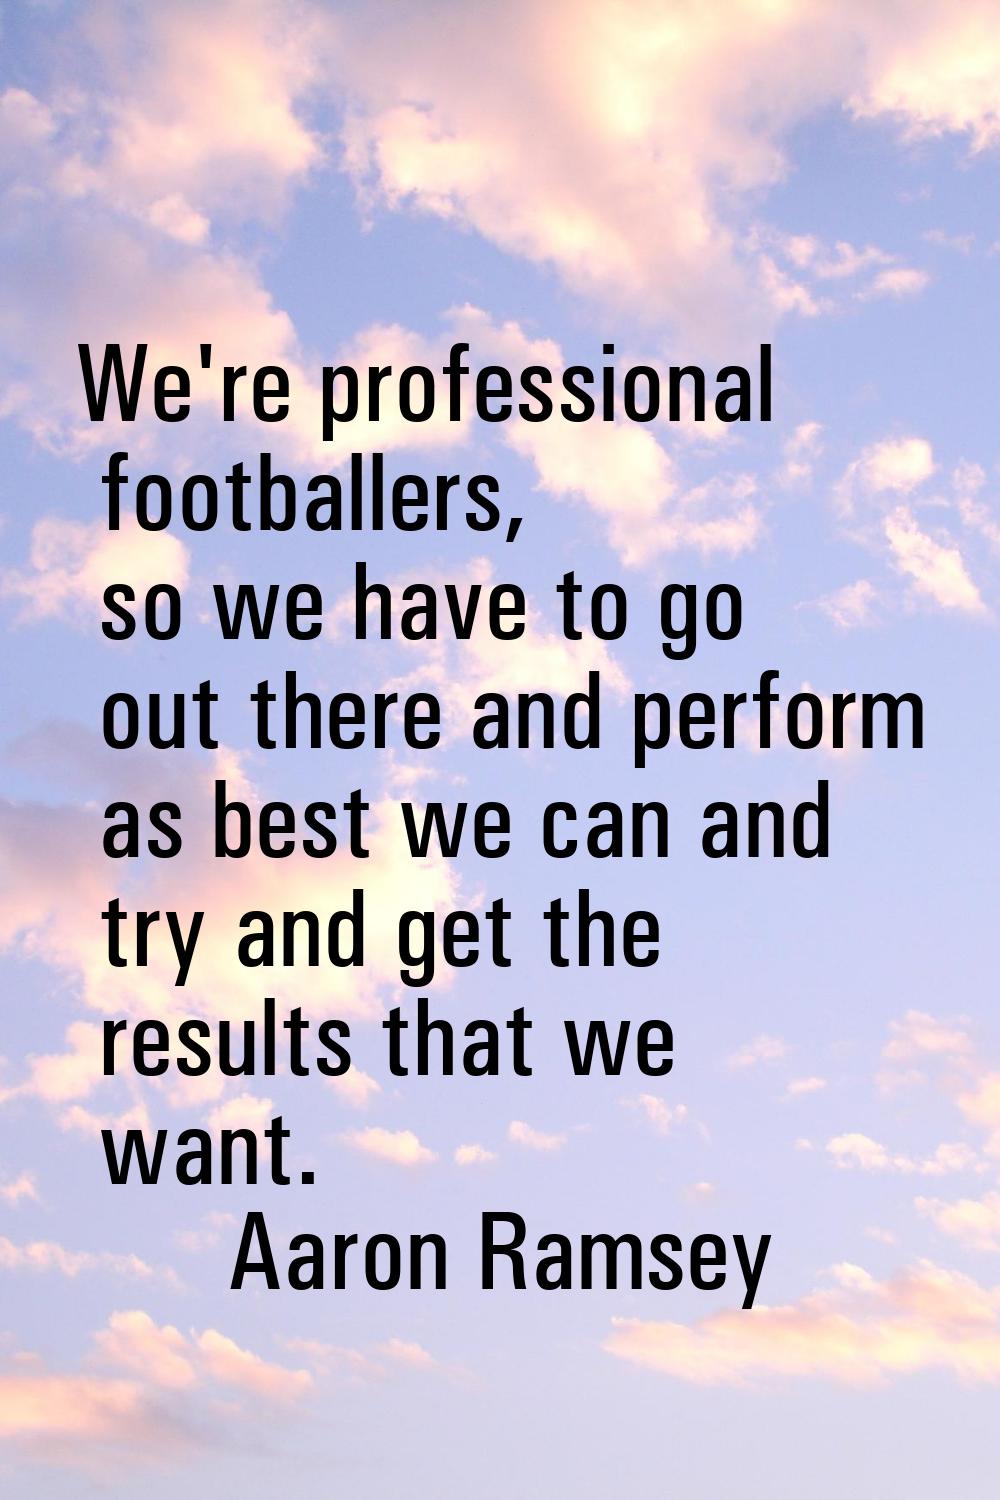 We're professional footballers, so we have to go out there and perform as best we can and try and g